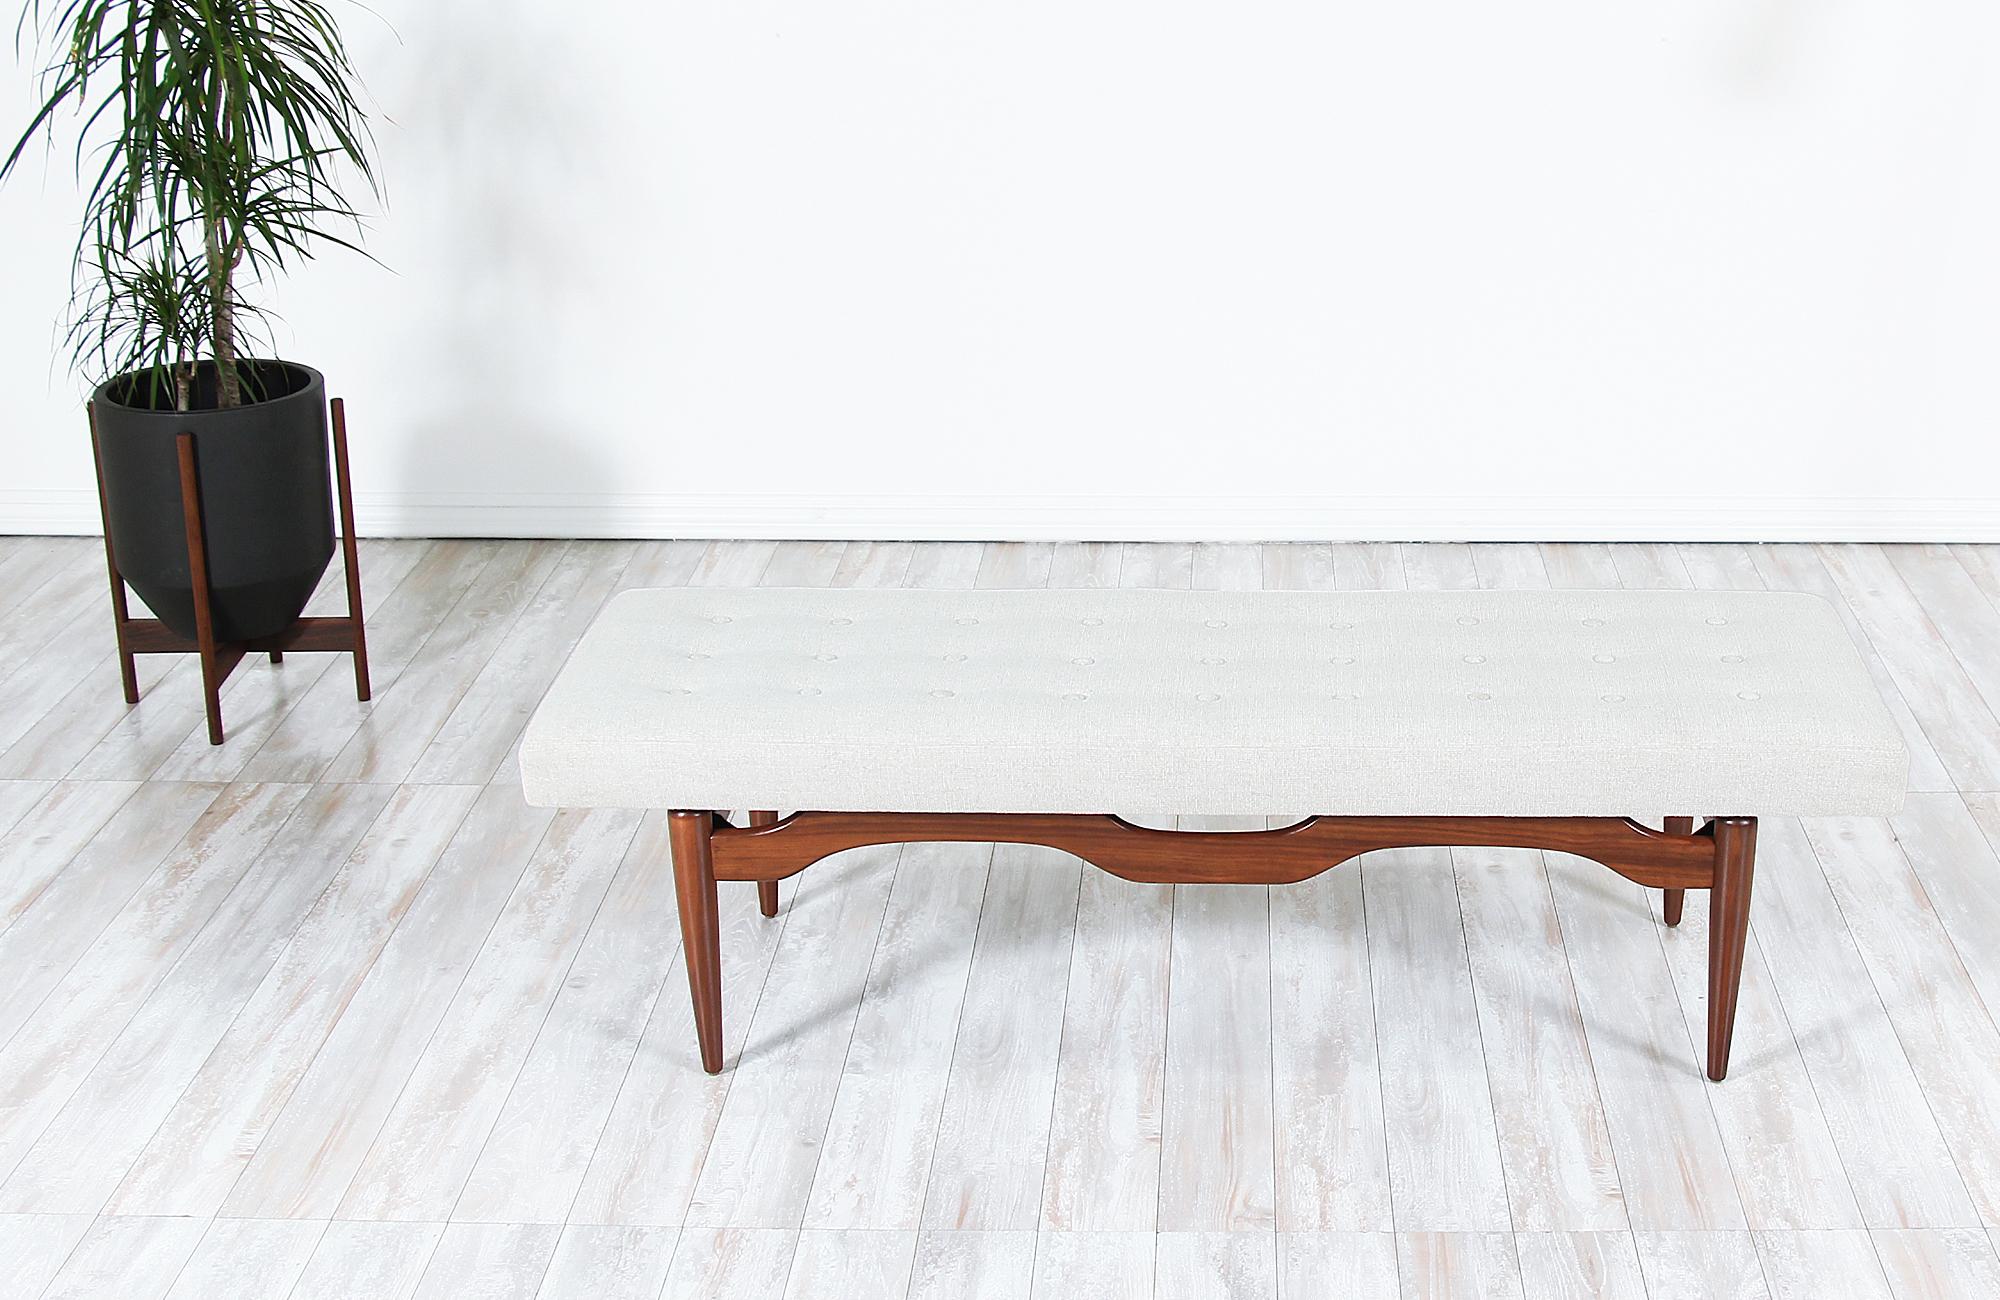 Mid-Century Modern bench designed and manufactured in the United States circa 1960s. A comfortable modern bench featuring a sculptural solid walnut wood base and new tweed upholstery with an elegant tufted detail making an excellent option for